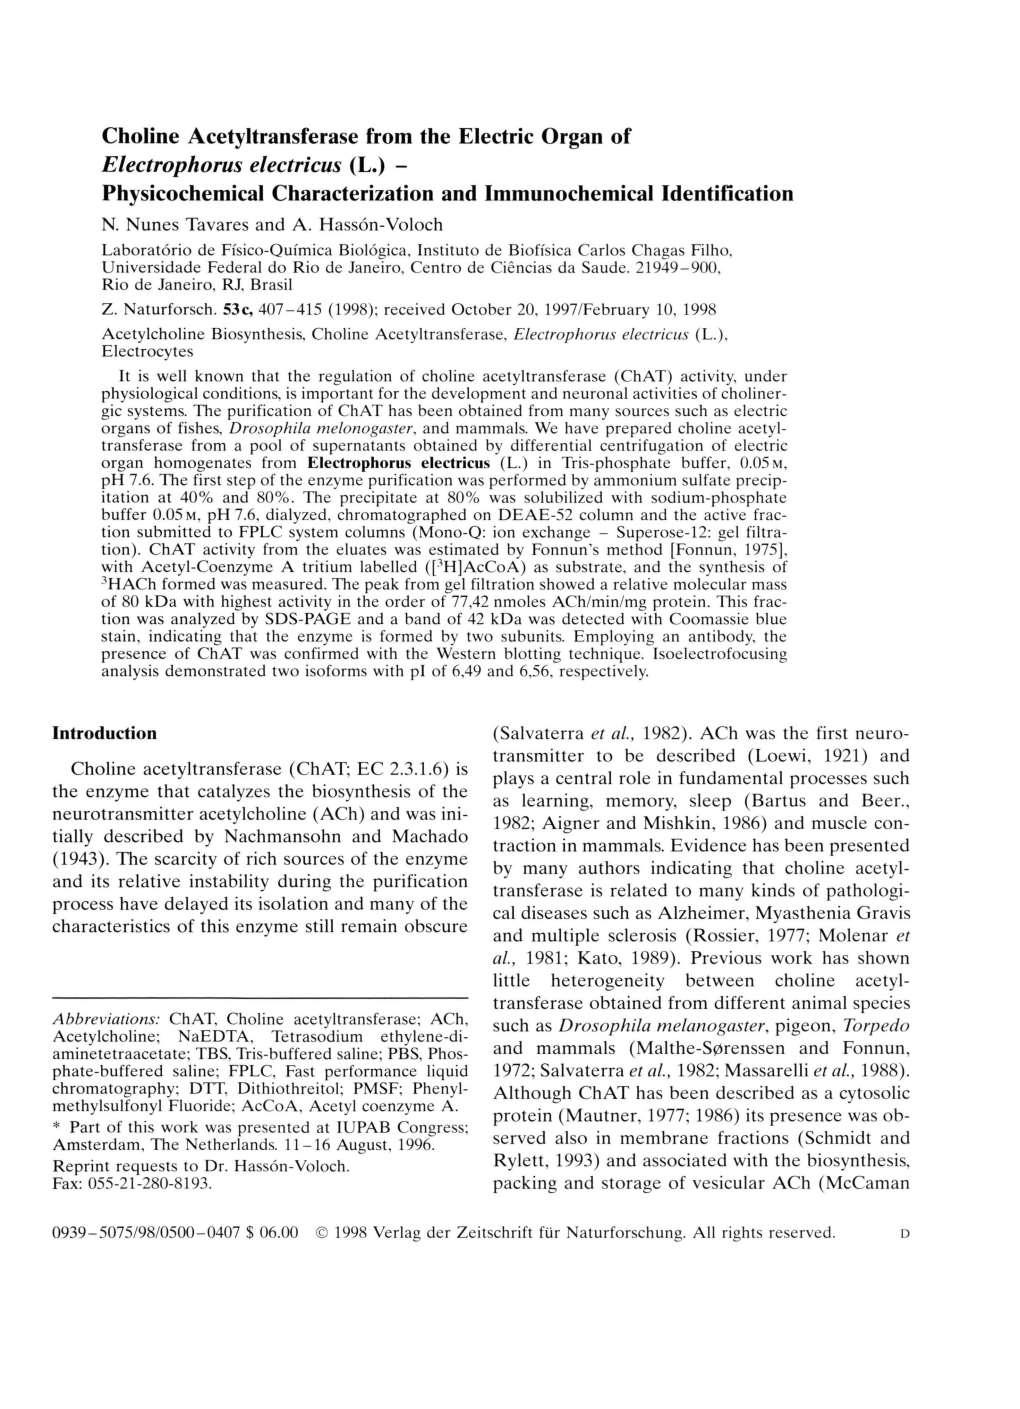 Electrophorus Electricus (L.) - Physicochemical Characterization and Immunochemical Identification N